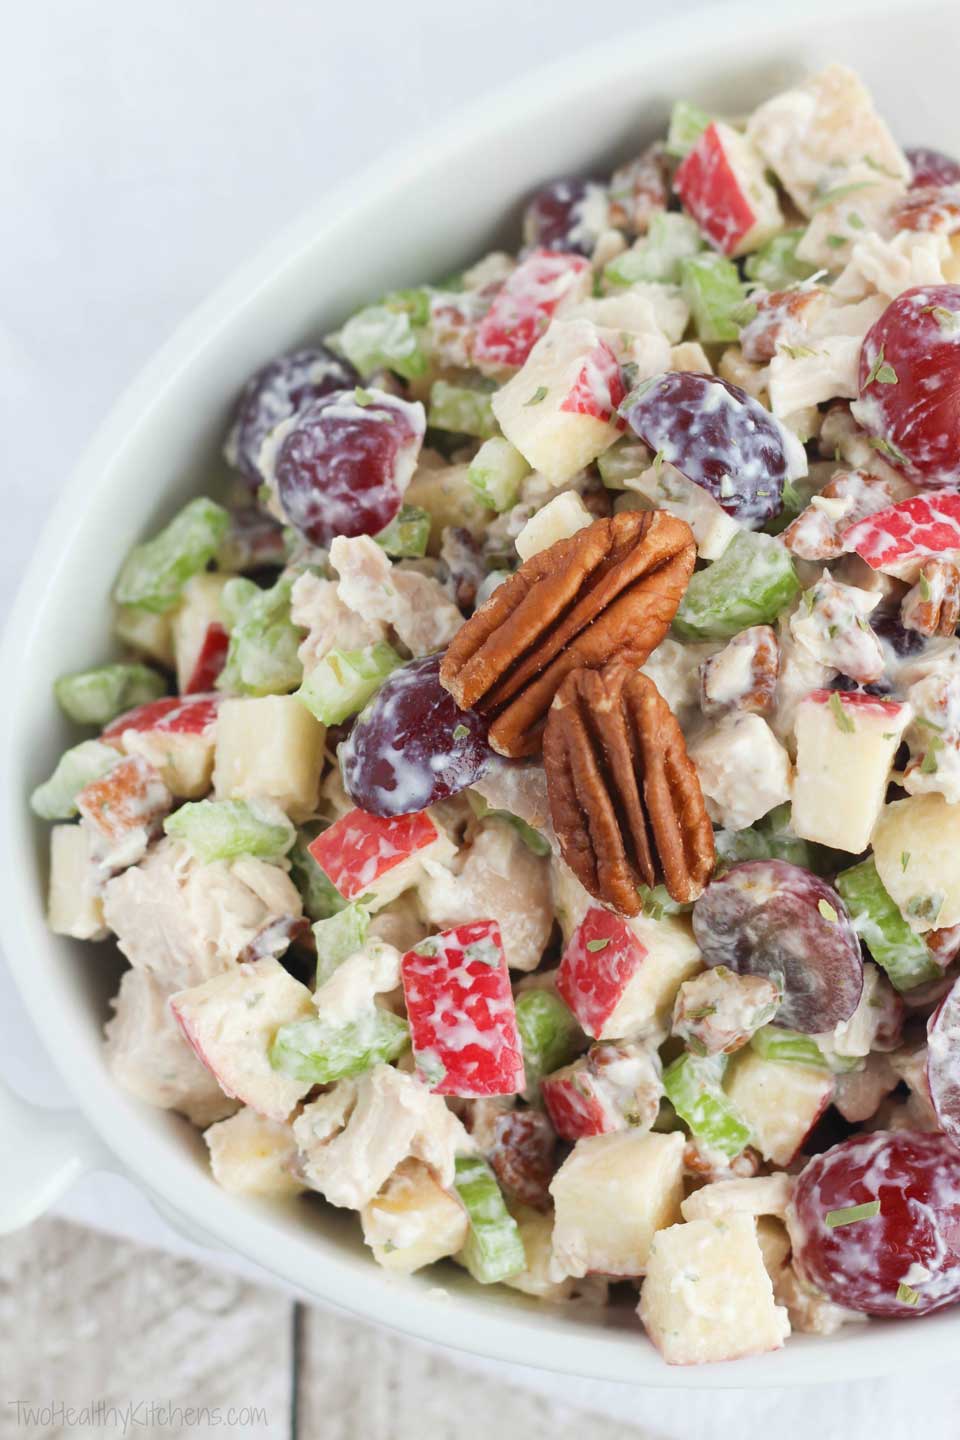 This chicken salad with grapes also features crisp apples and crunchy pecans. It’s a mayo-free chicken salad recipe with a delicious Greek yogurt dressing – so perfect for summer picnics!